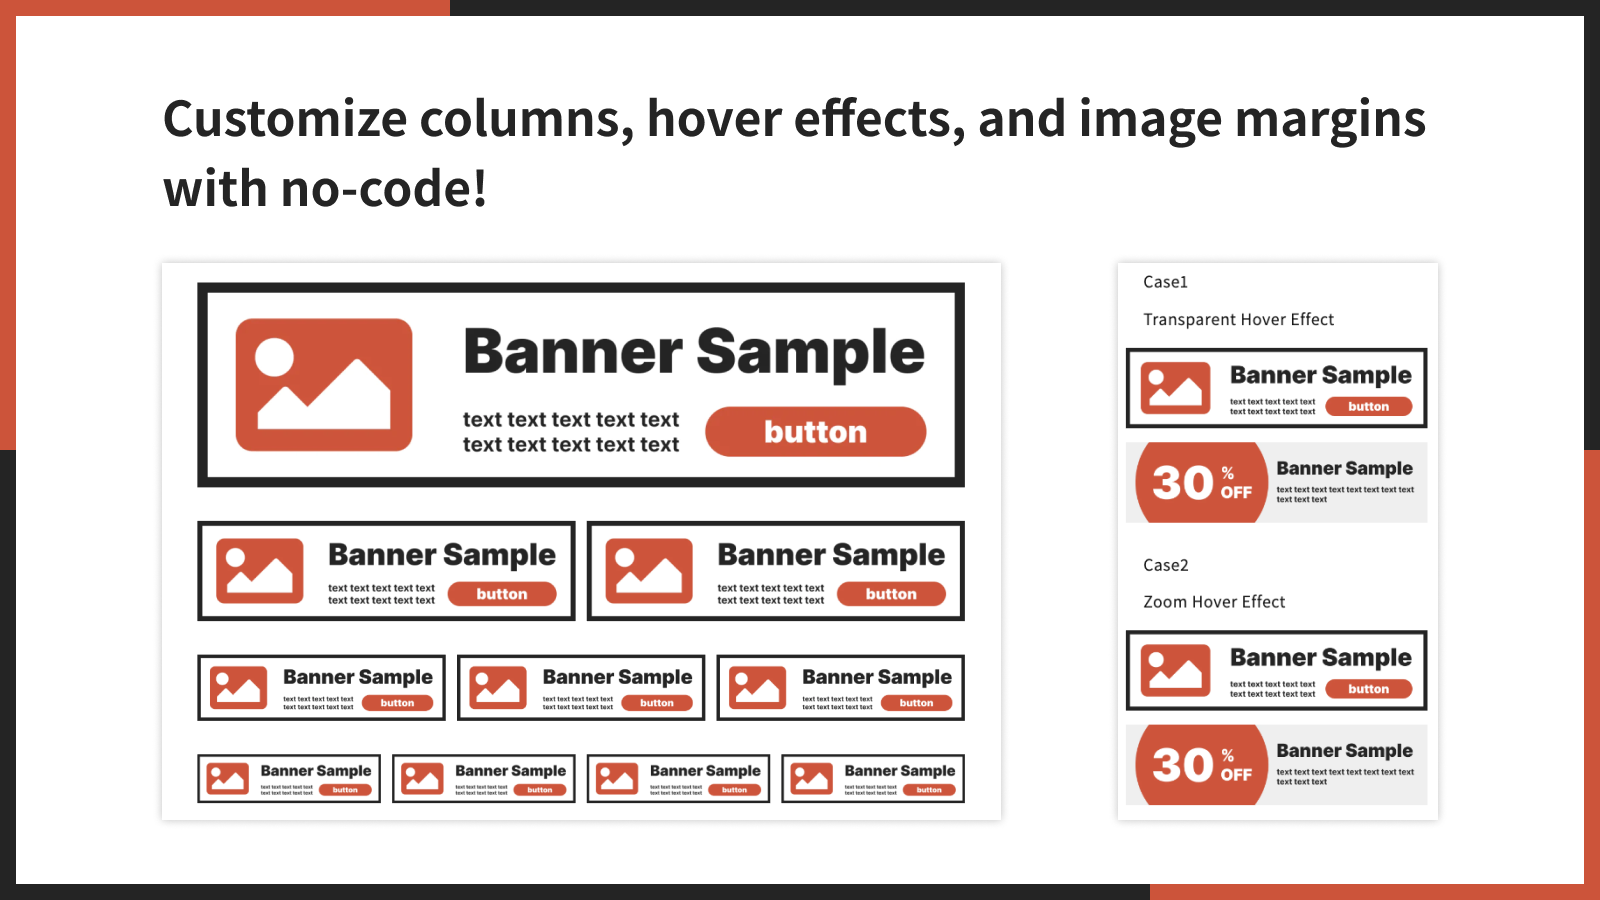 Customize columns, hover effects, and image margins.